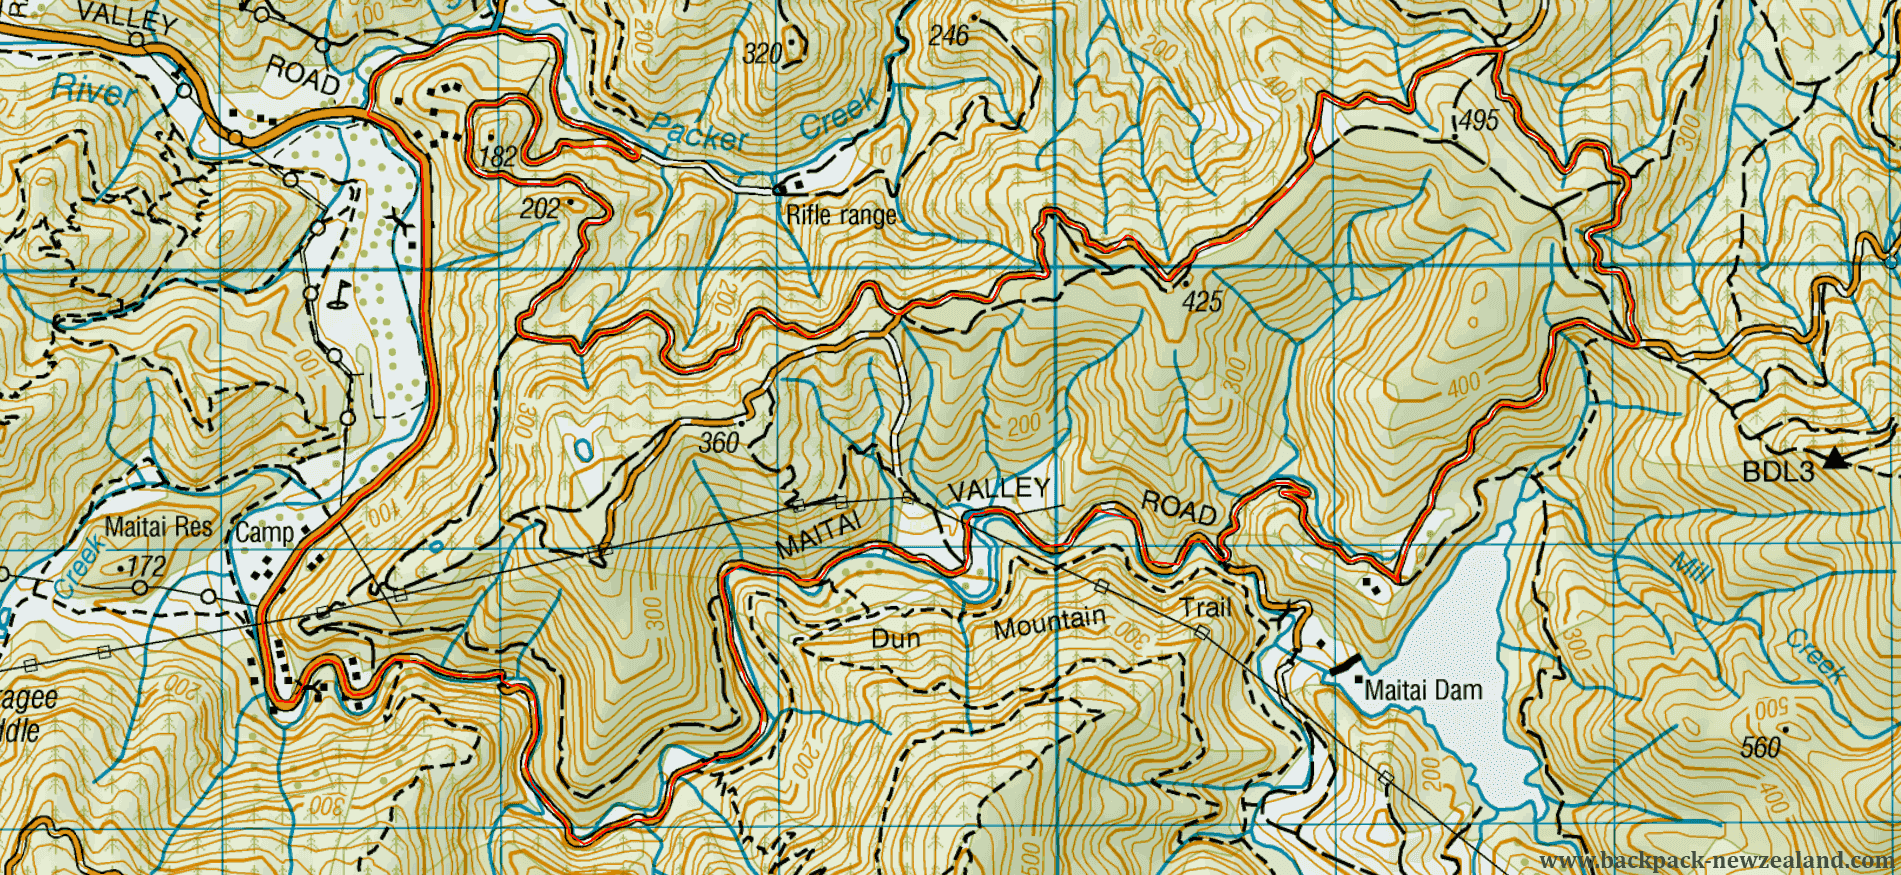 Central And Teal Saddle Loop Map - New Zealand Tracks